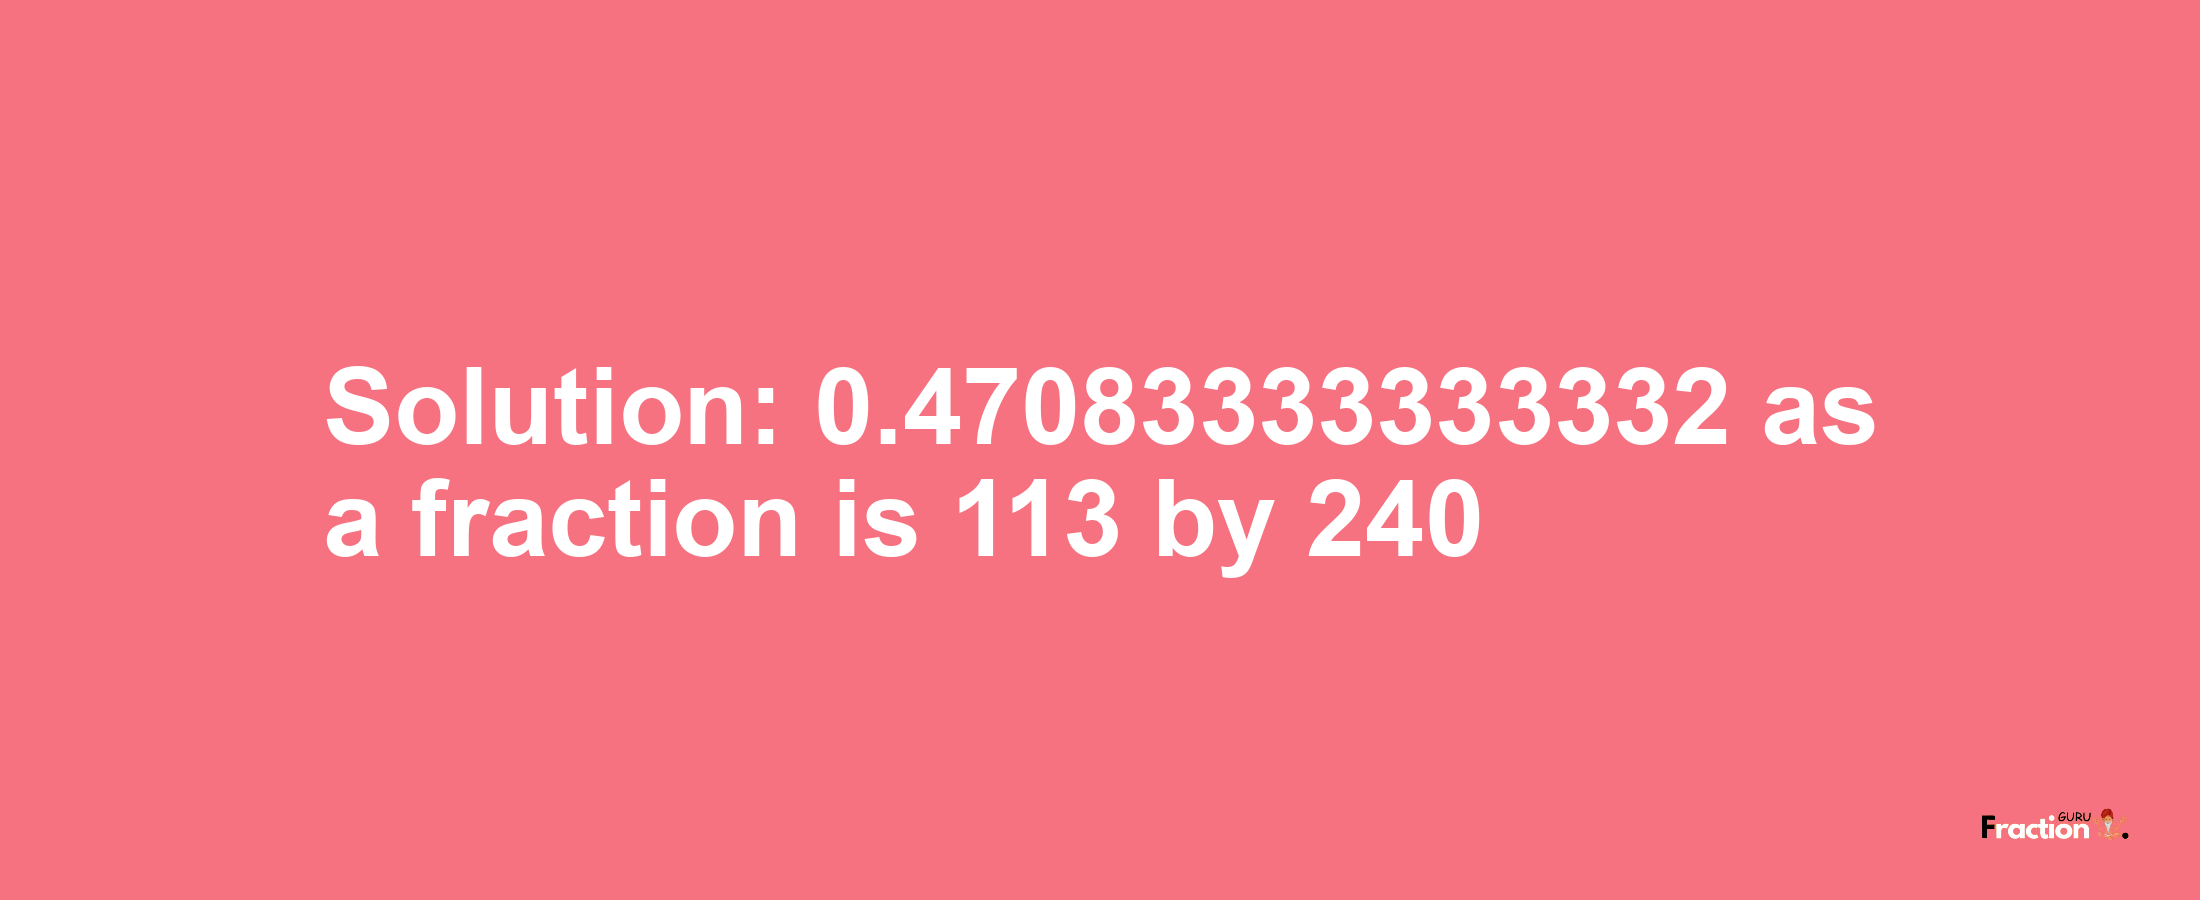 Solution:0.47083333333332 as a fraction is 113/240